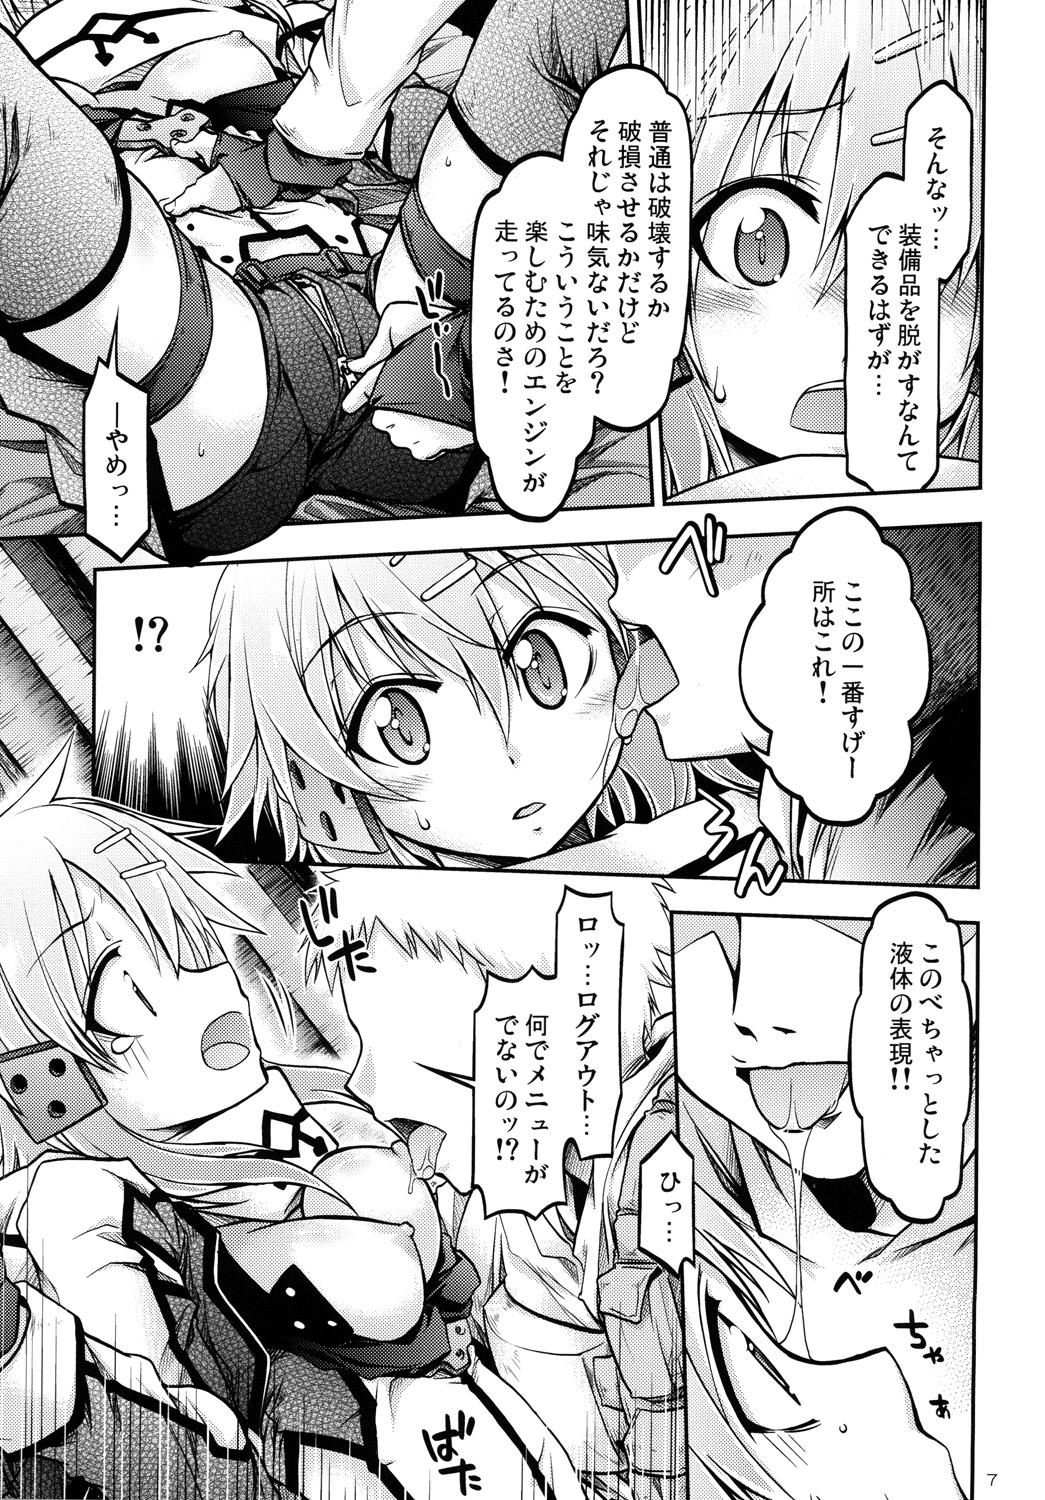 Rimming Gspot - Sword art online Leche - Page 6